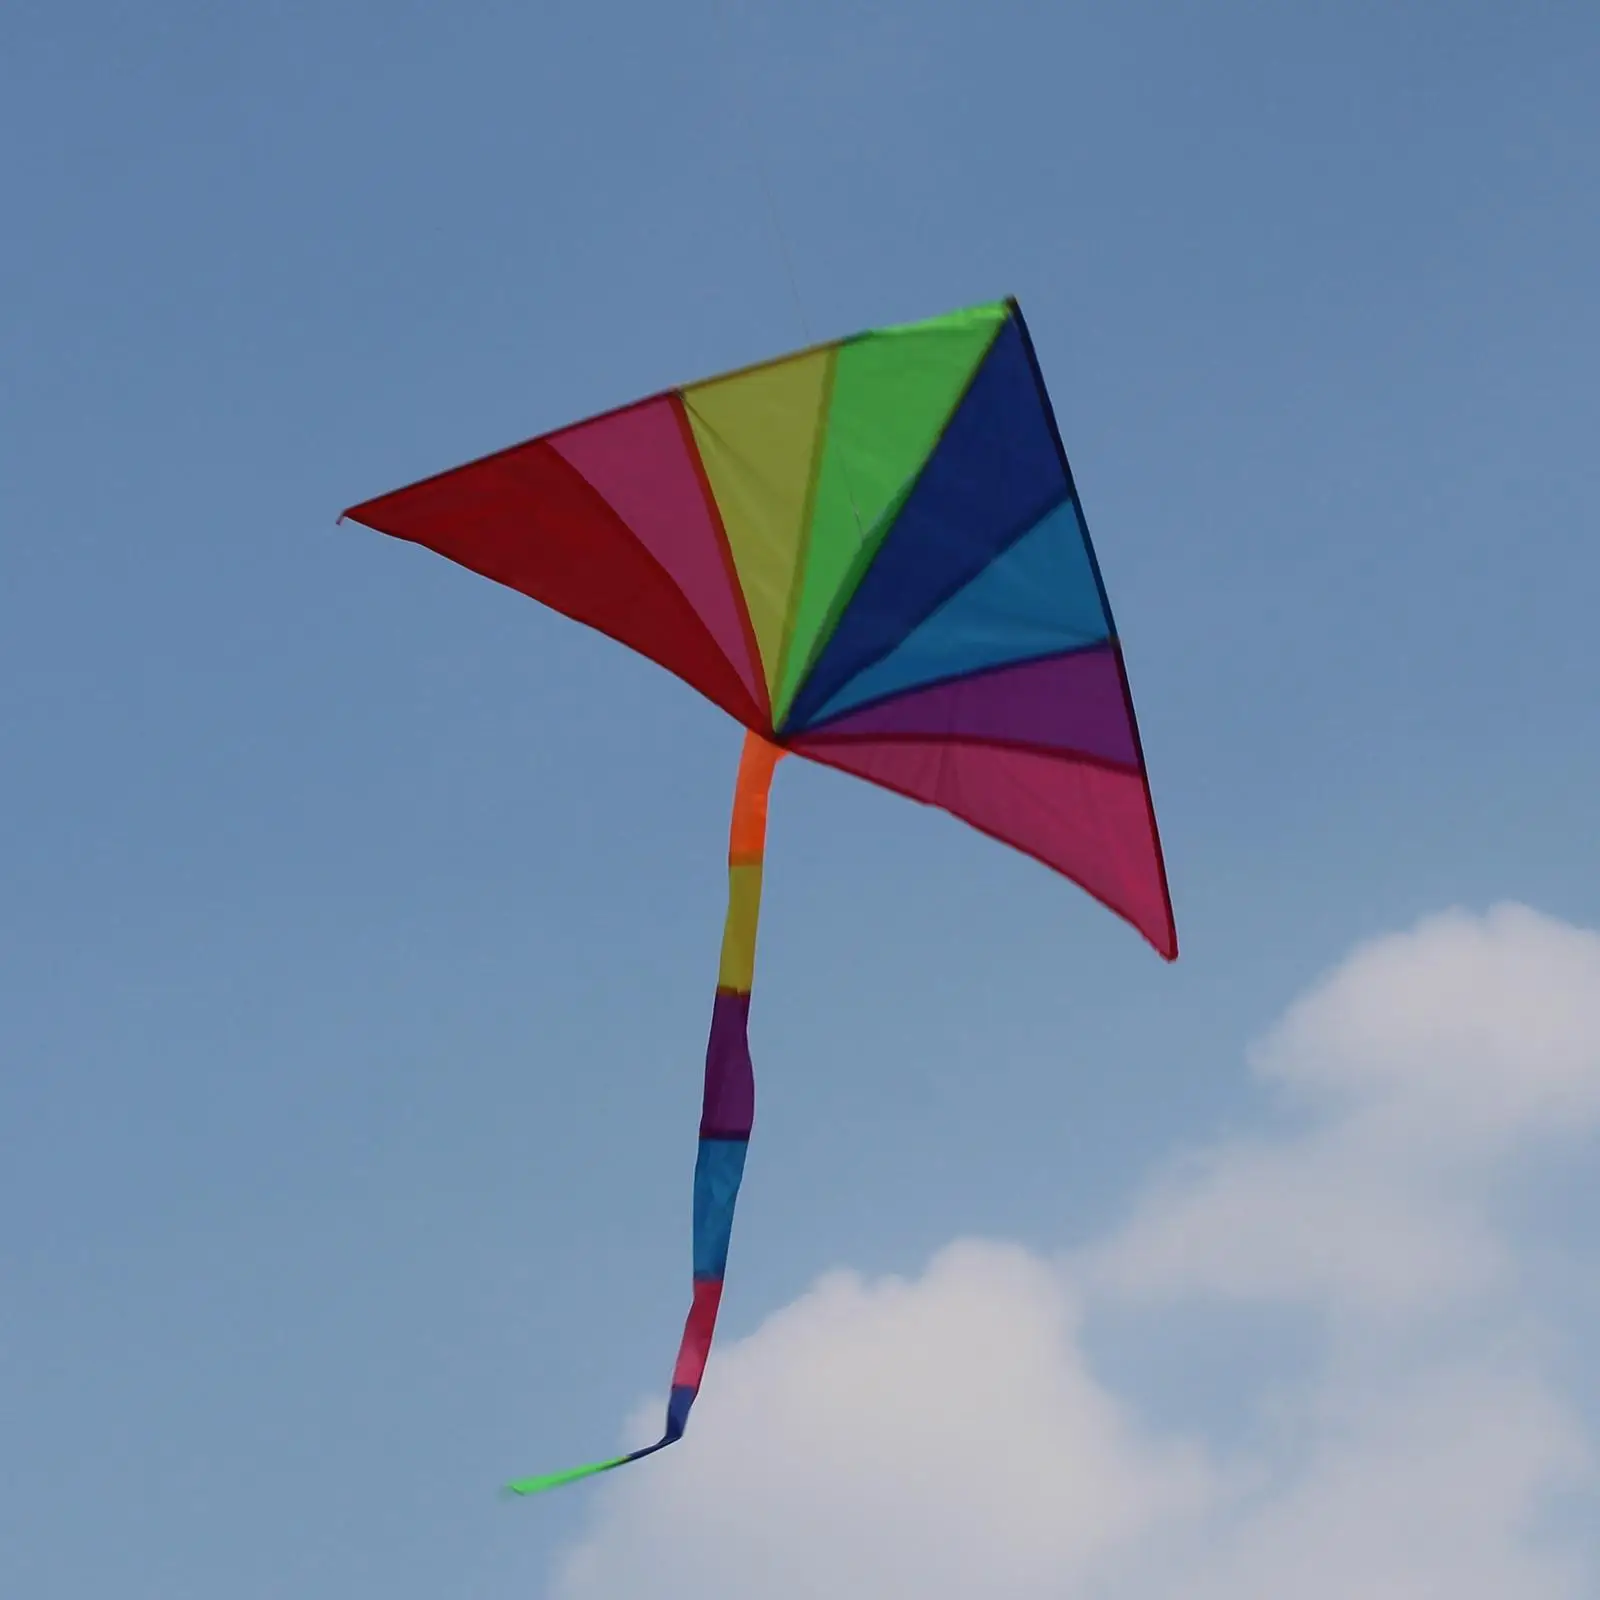 Rainbow Delta Kite Huge Windsock Easy to Fly Large Triangle Kite Park Teenagers Children and Adults